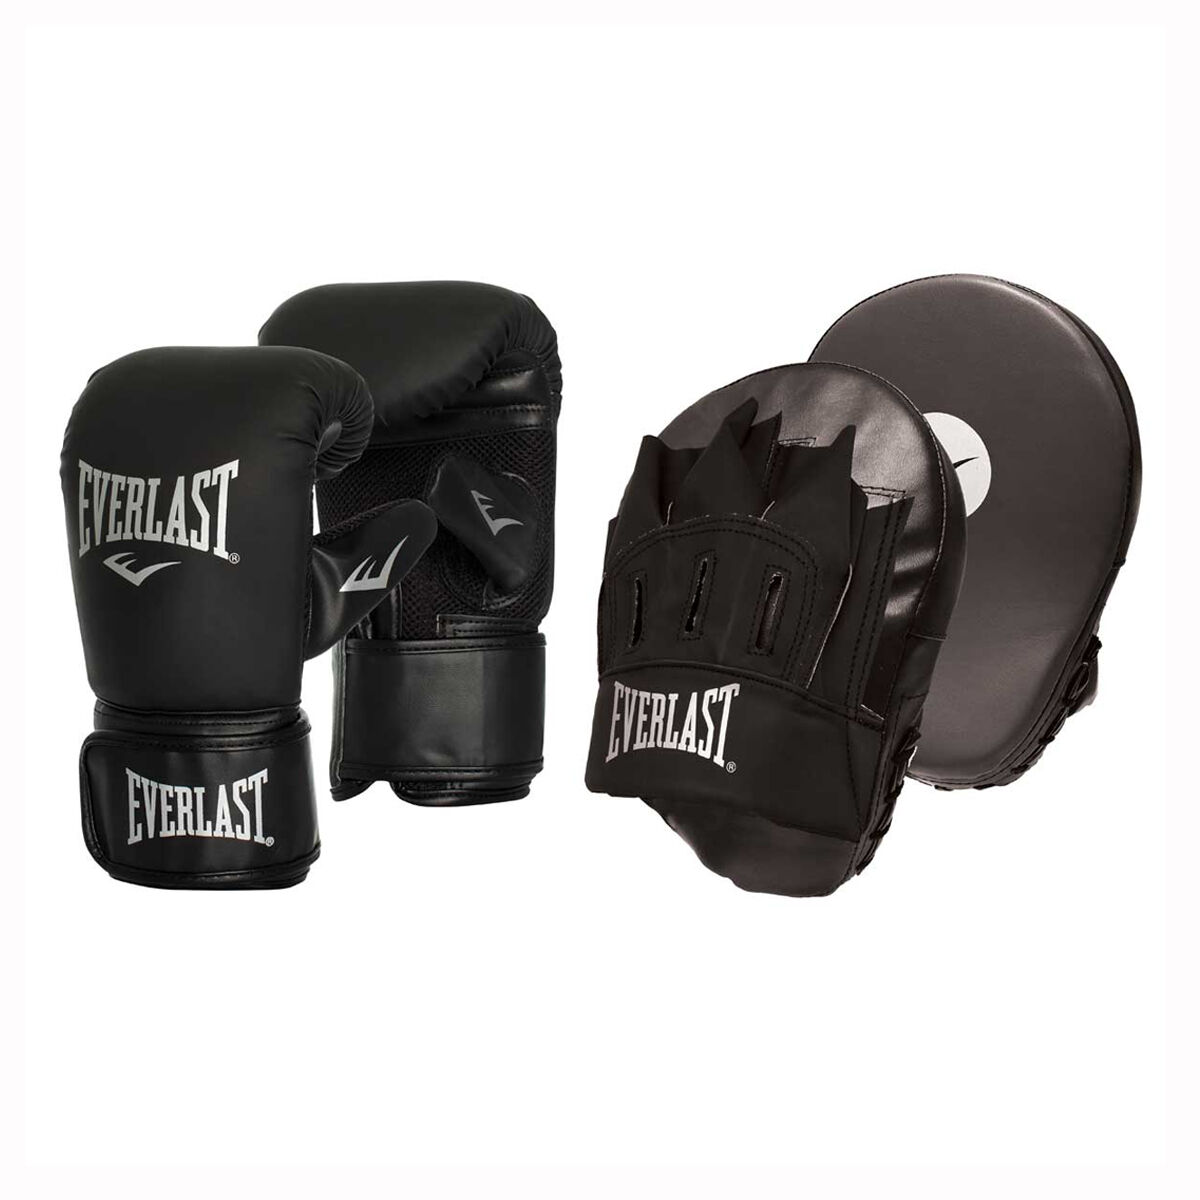 Everlast Tempo Bag Boxing Glove and 